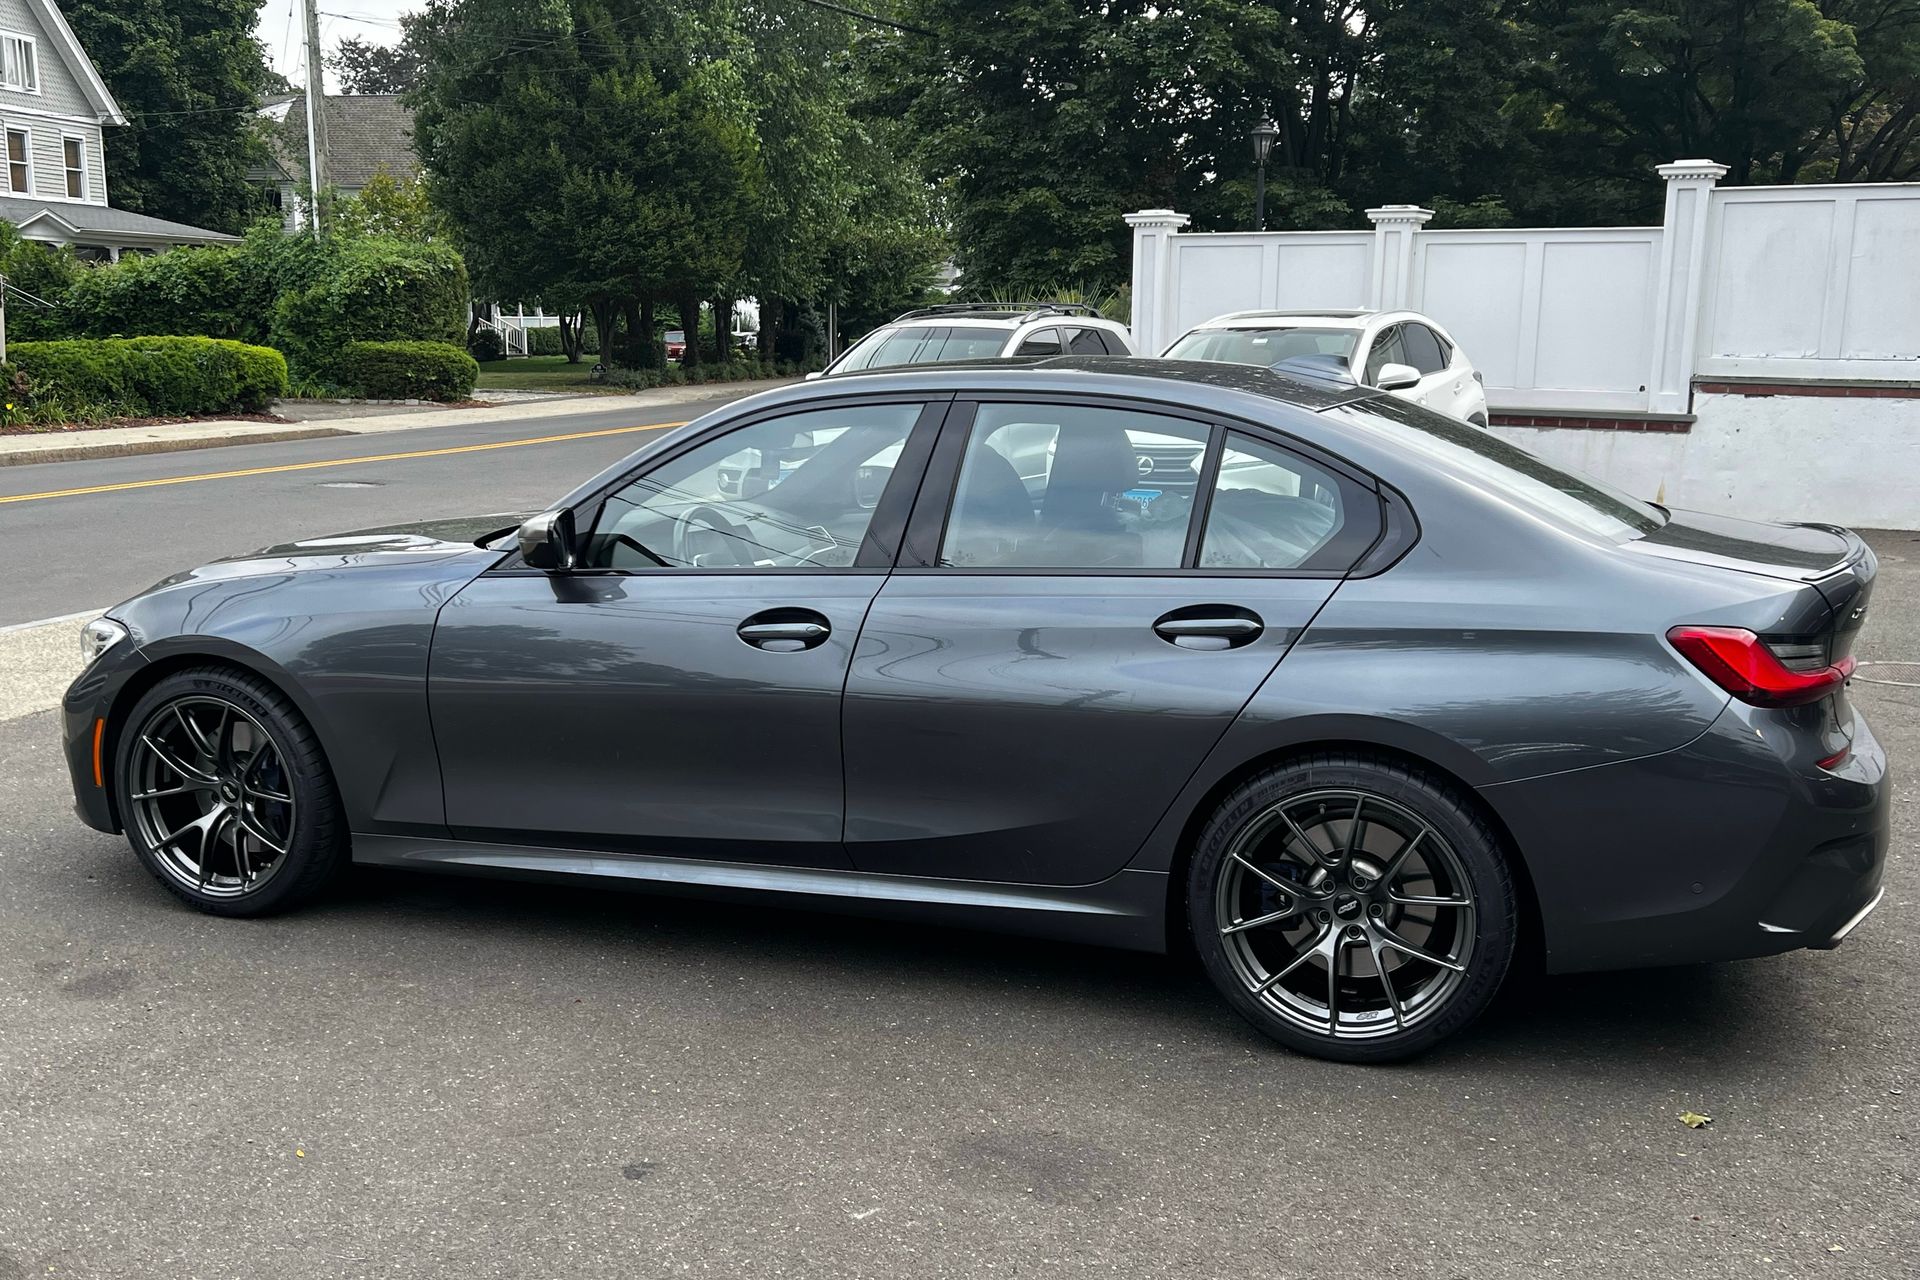 BMW G20 Sedan 3 Series with 19" VS-5RS in Anthracite